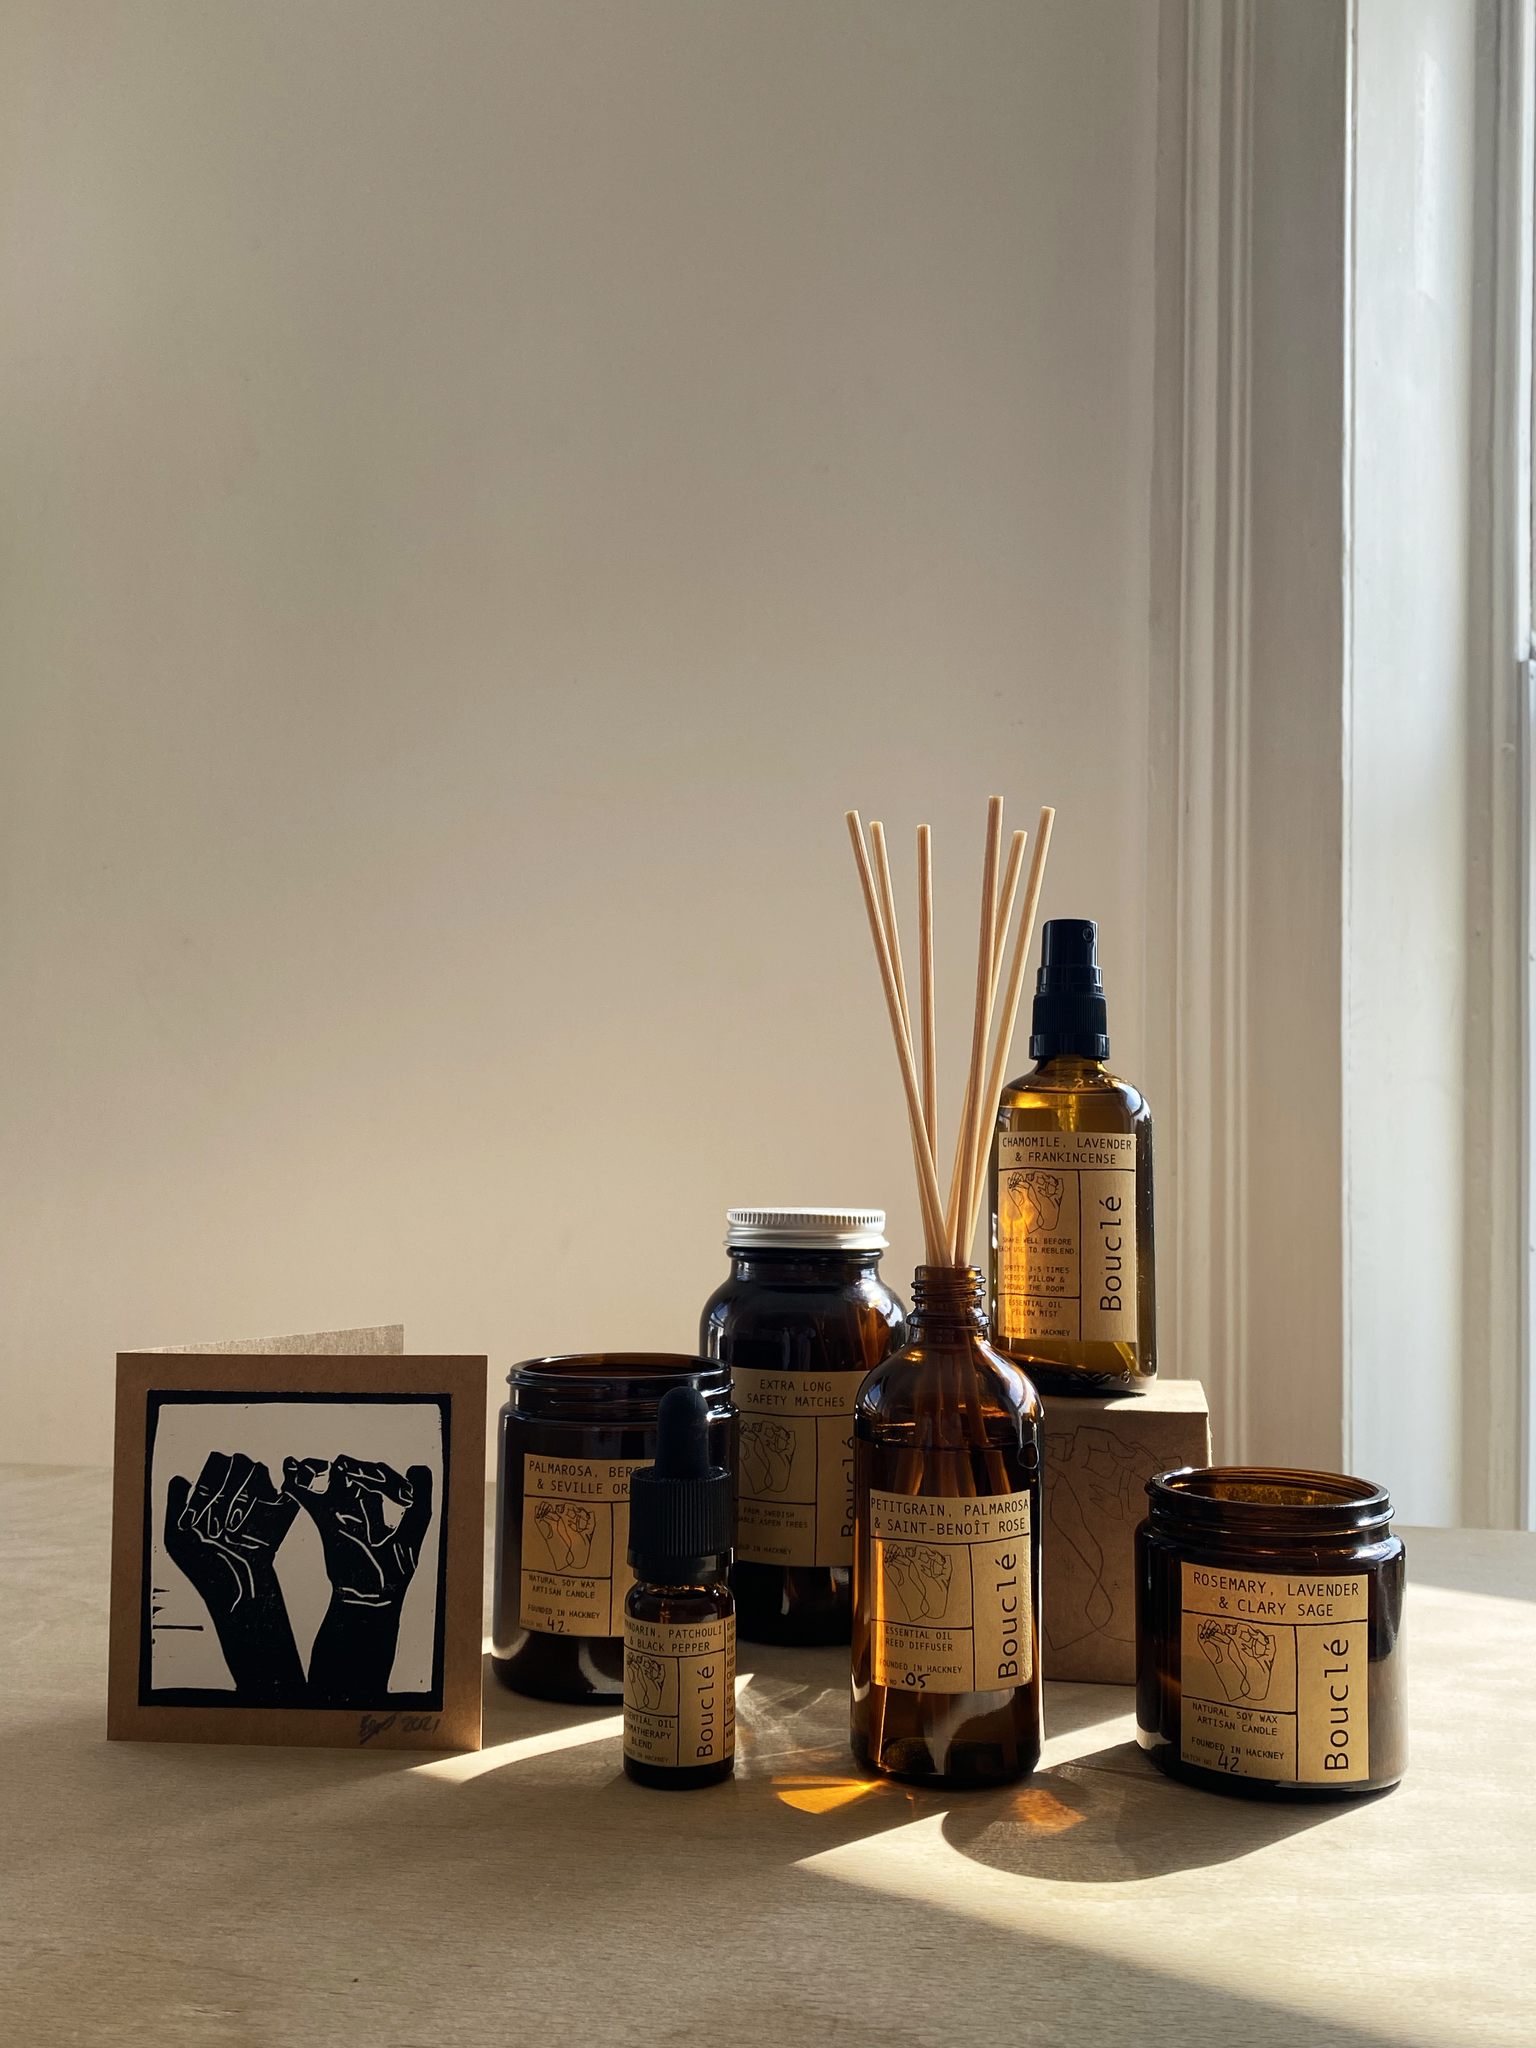 Collection of Bouclé London essential oil hand made products including soy candles, rattan reed diffusers, pillow sprays, room sprays, essential oil dropper, organic hand wash & card